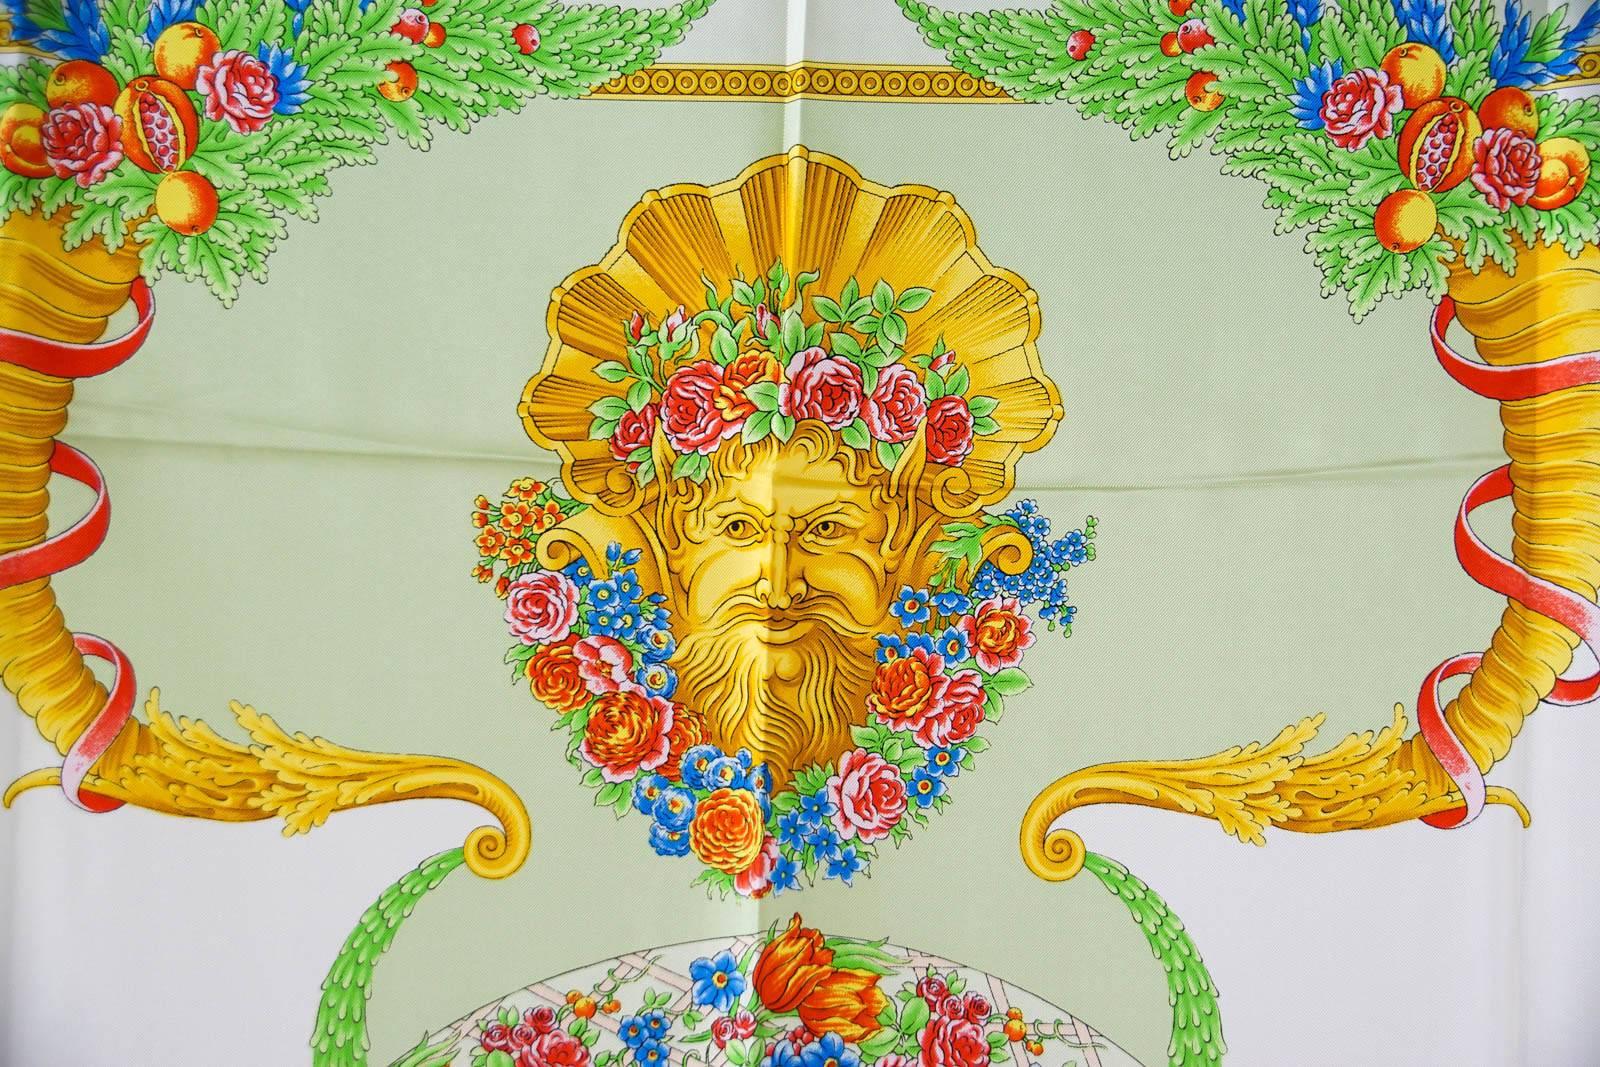 Guaranteed authentic GIANNI VERSACE ATELIER Vintage scarf Garden motif hand rolled edge.
Beautiful Idyllic Garden silk scarf.
In shades of green, gold, red, blue and pink.
Extraordinary!
1 small thread pull.
final sale

SCARF MEASURES:
34" X 